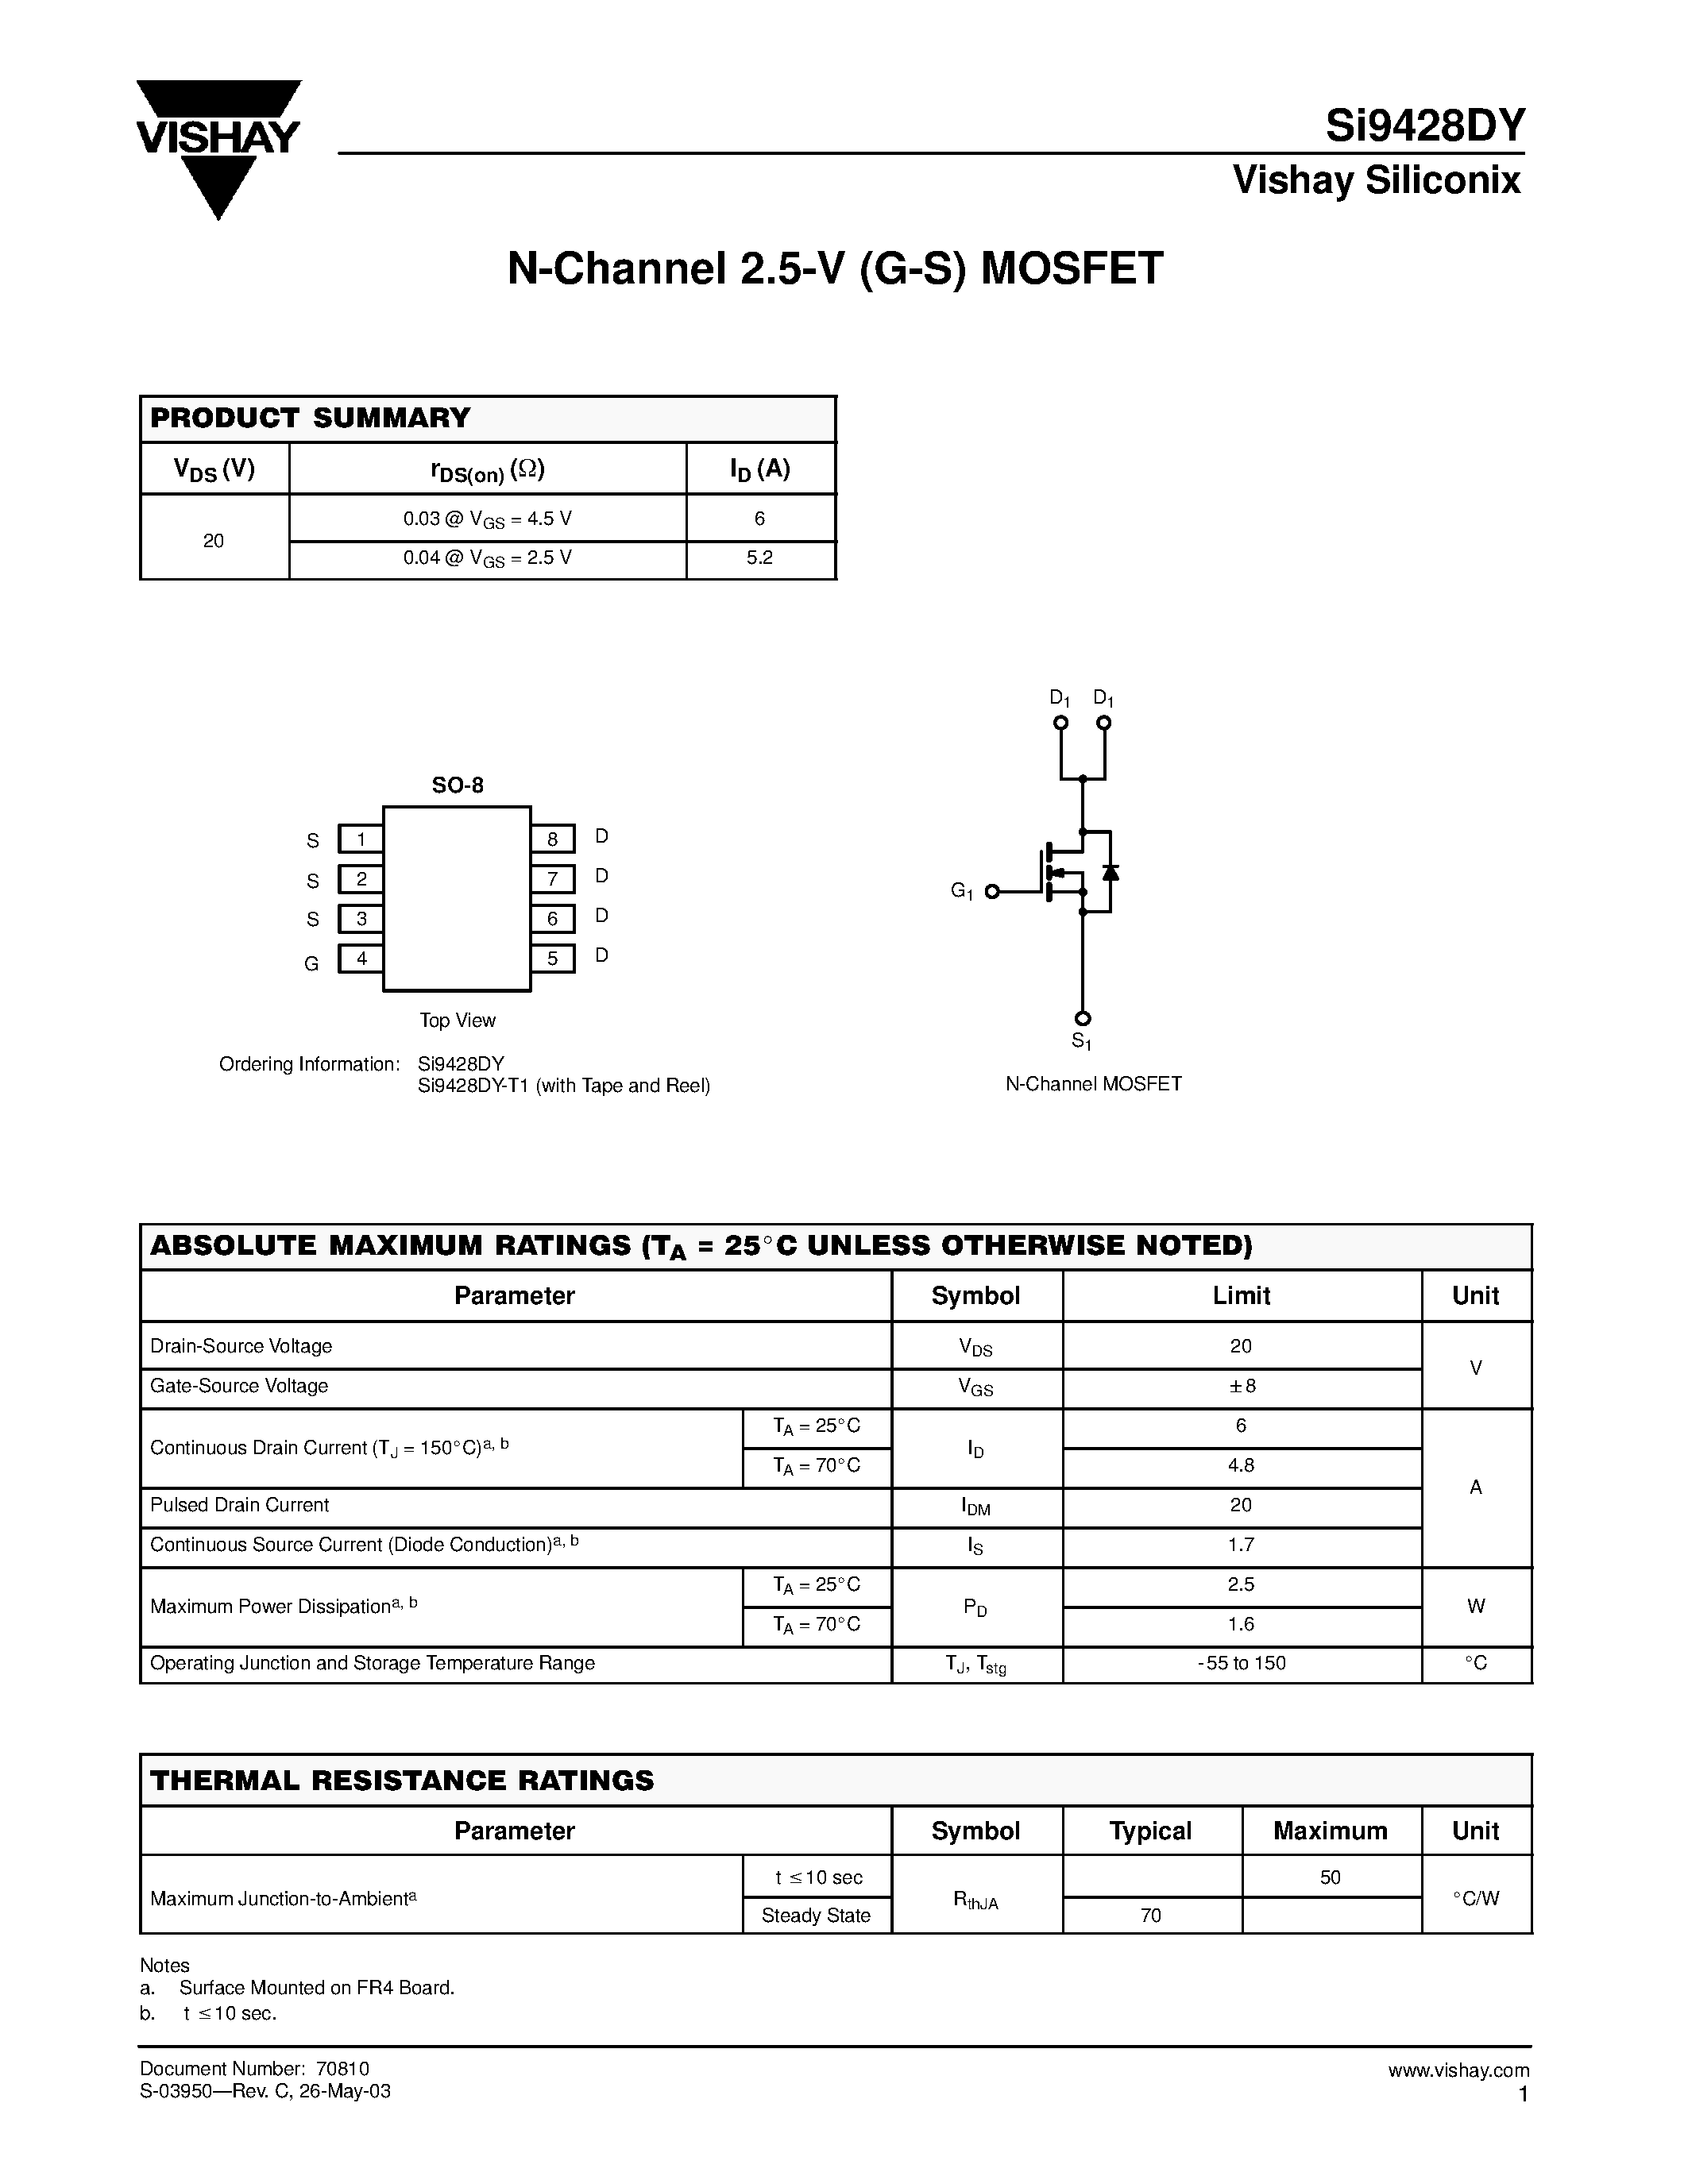 Datasheet SI9428DY - N-Channel 2.5-V (G-S) MOSFET page 1